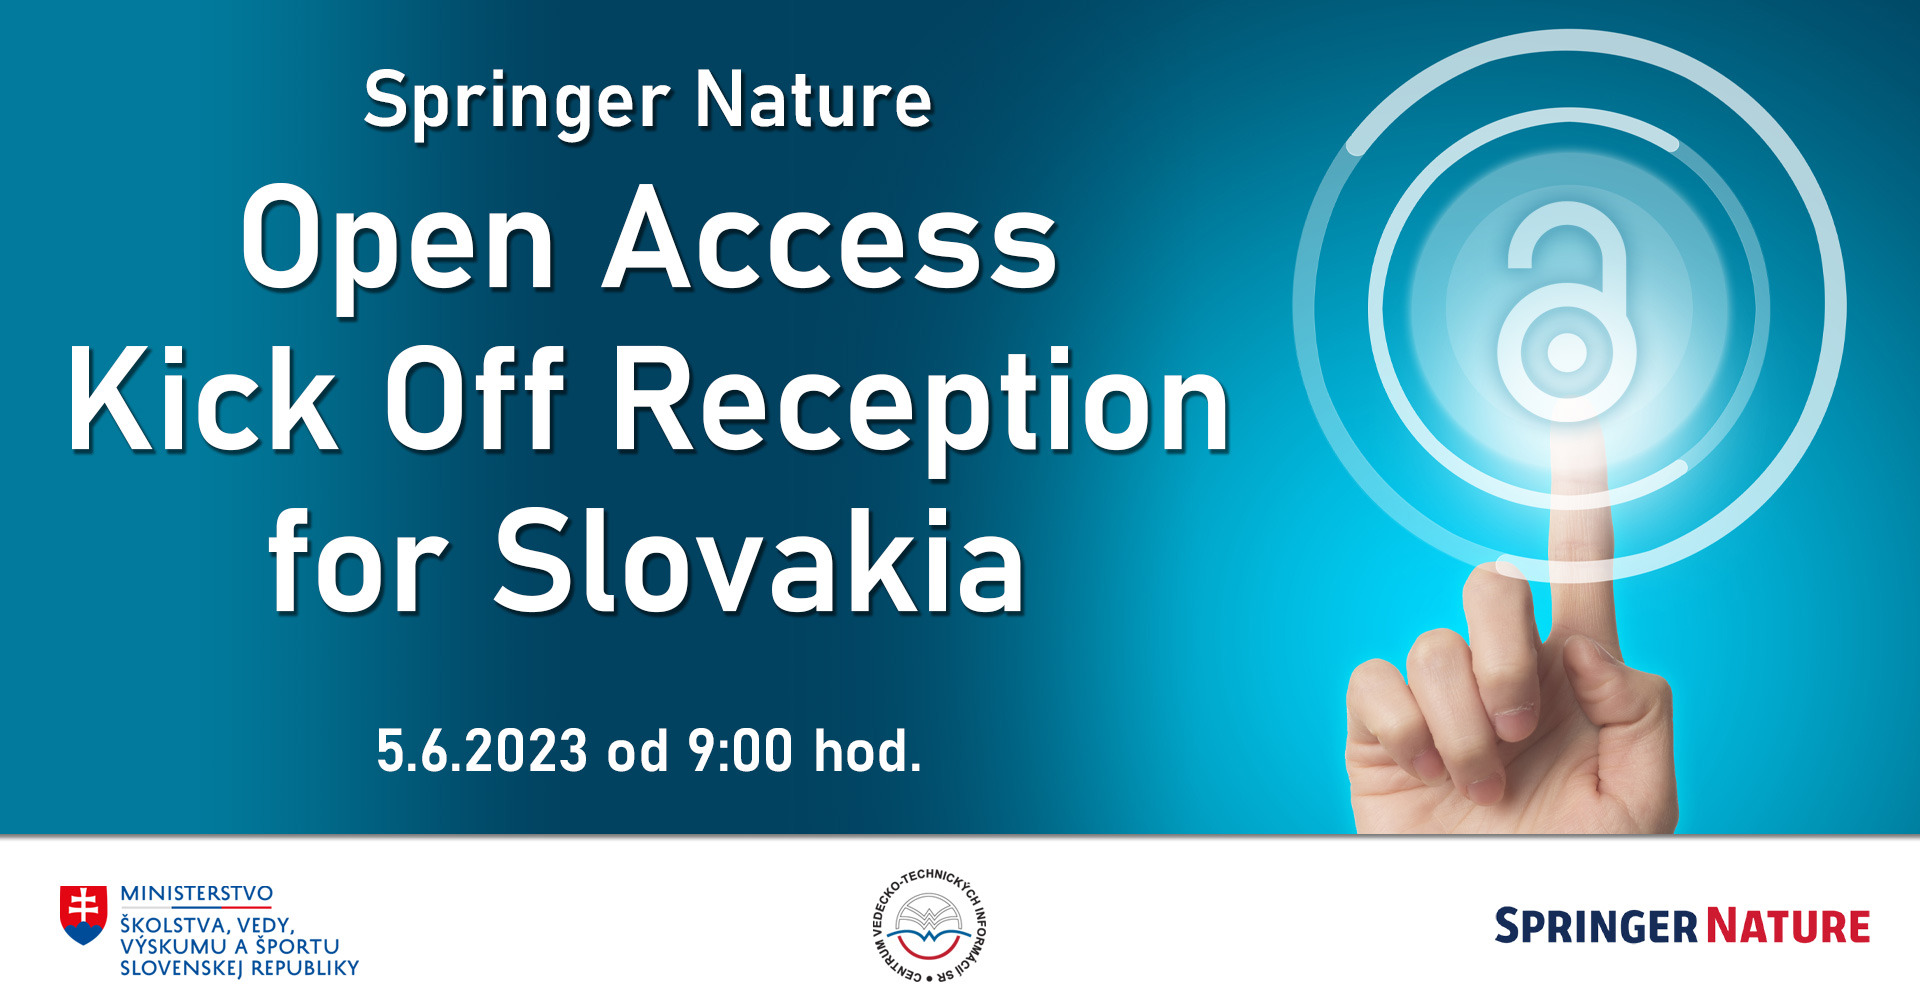 Springer Nature Open Access Kick Off Reception for Slovakia